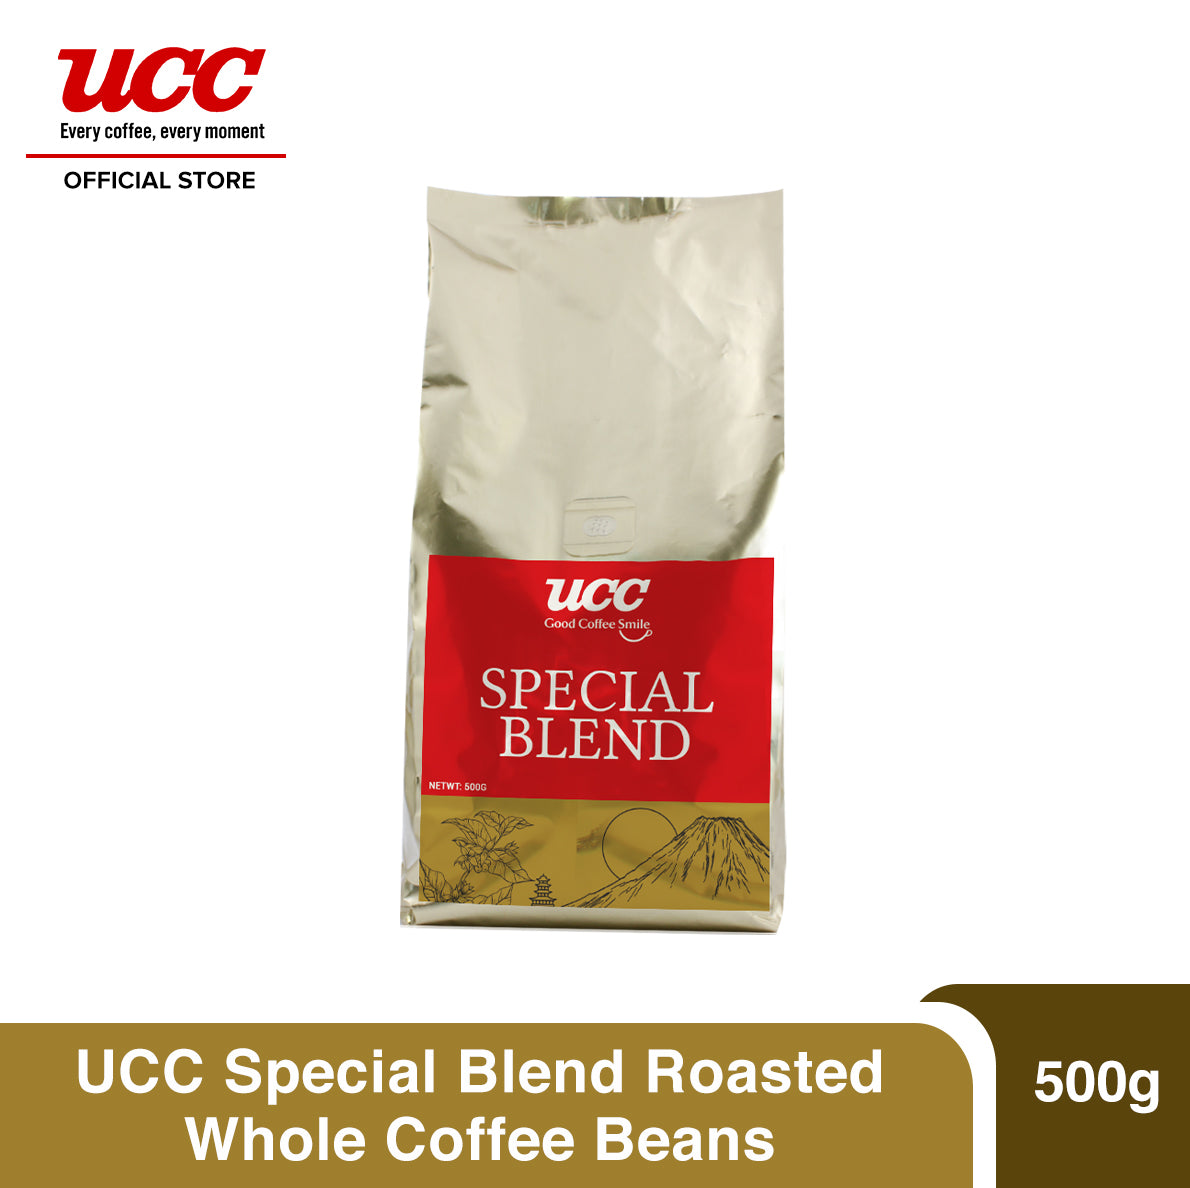 UCC Special Blend Roasted Whole Coffee Beans 500g